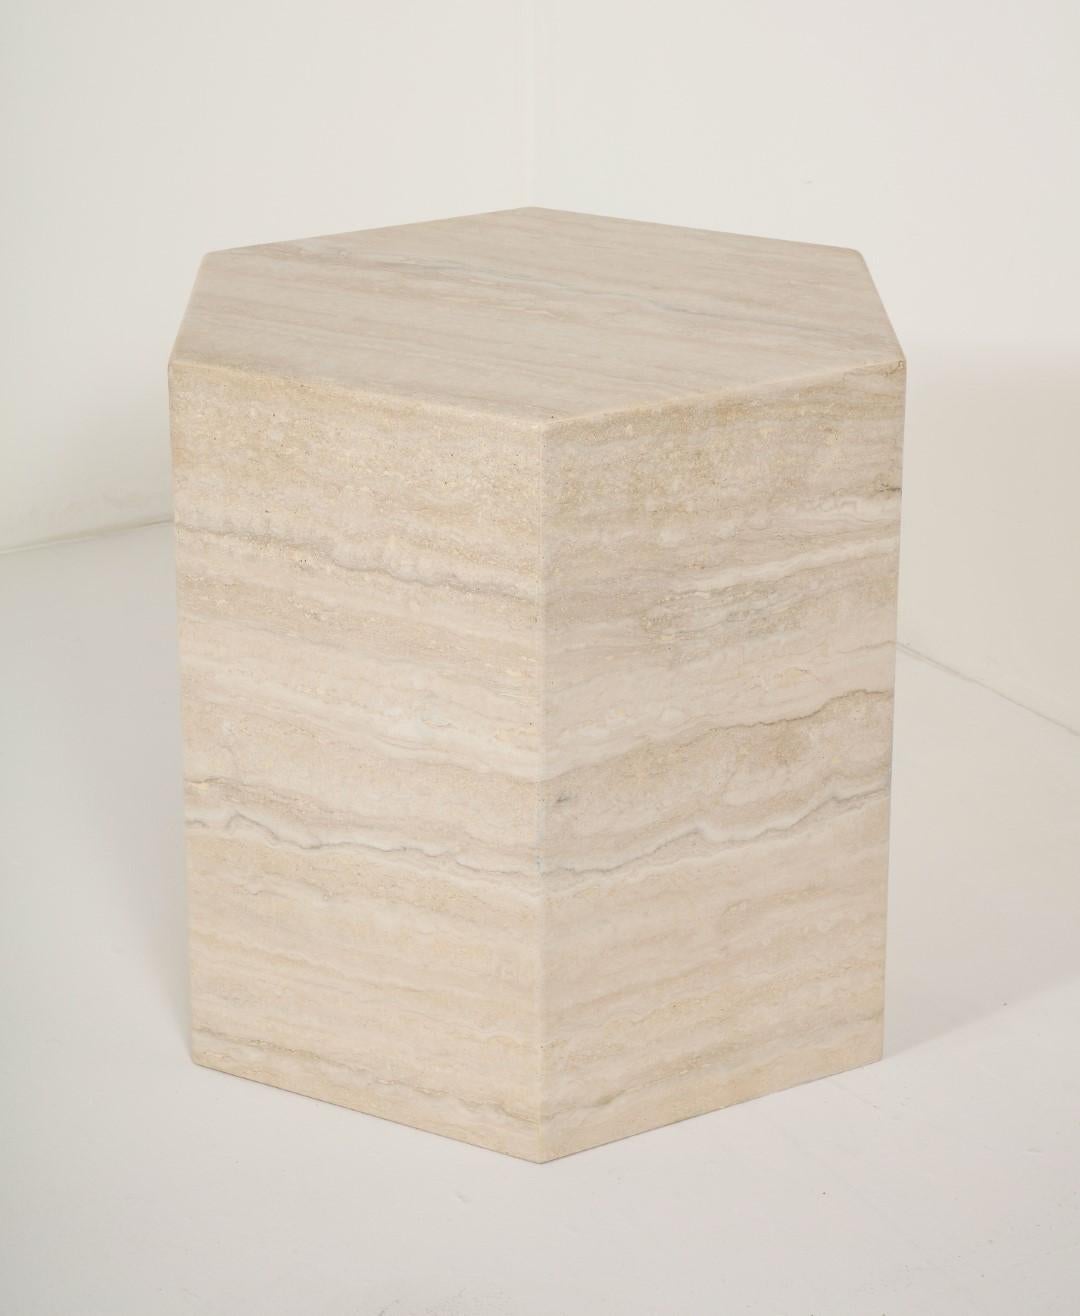 Solid Italian travertine marble hexagonal side table or pedestal. Can also be set horizontally for a coffee table. The polished travertine is beige and cream colored with beautiful variations.